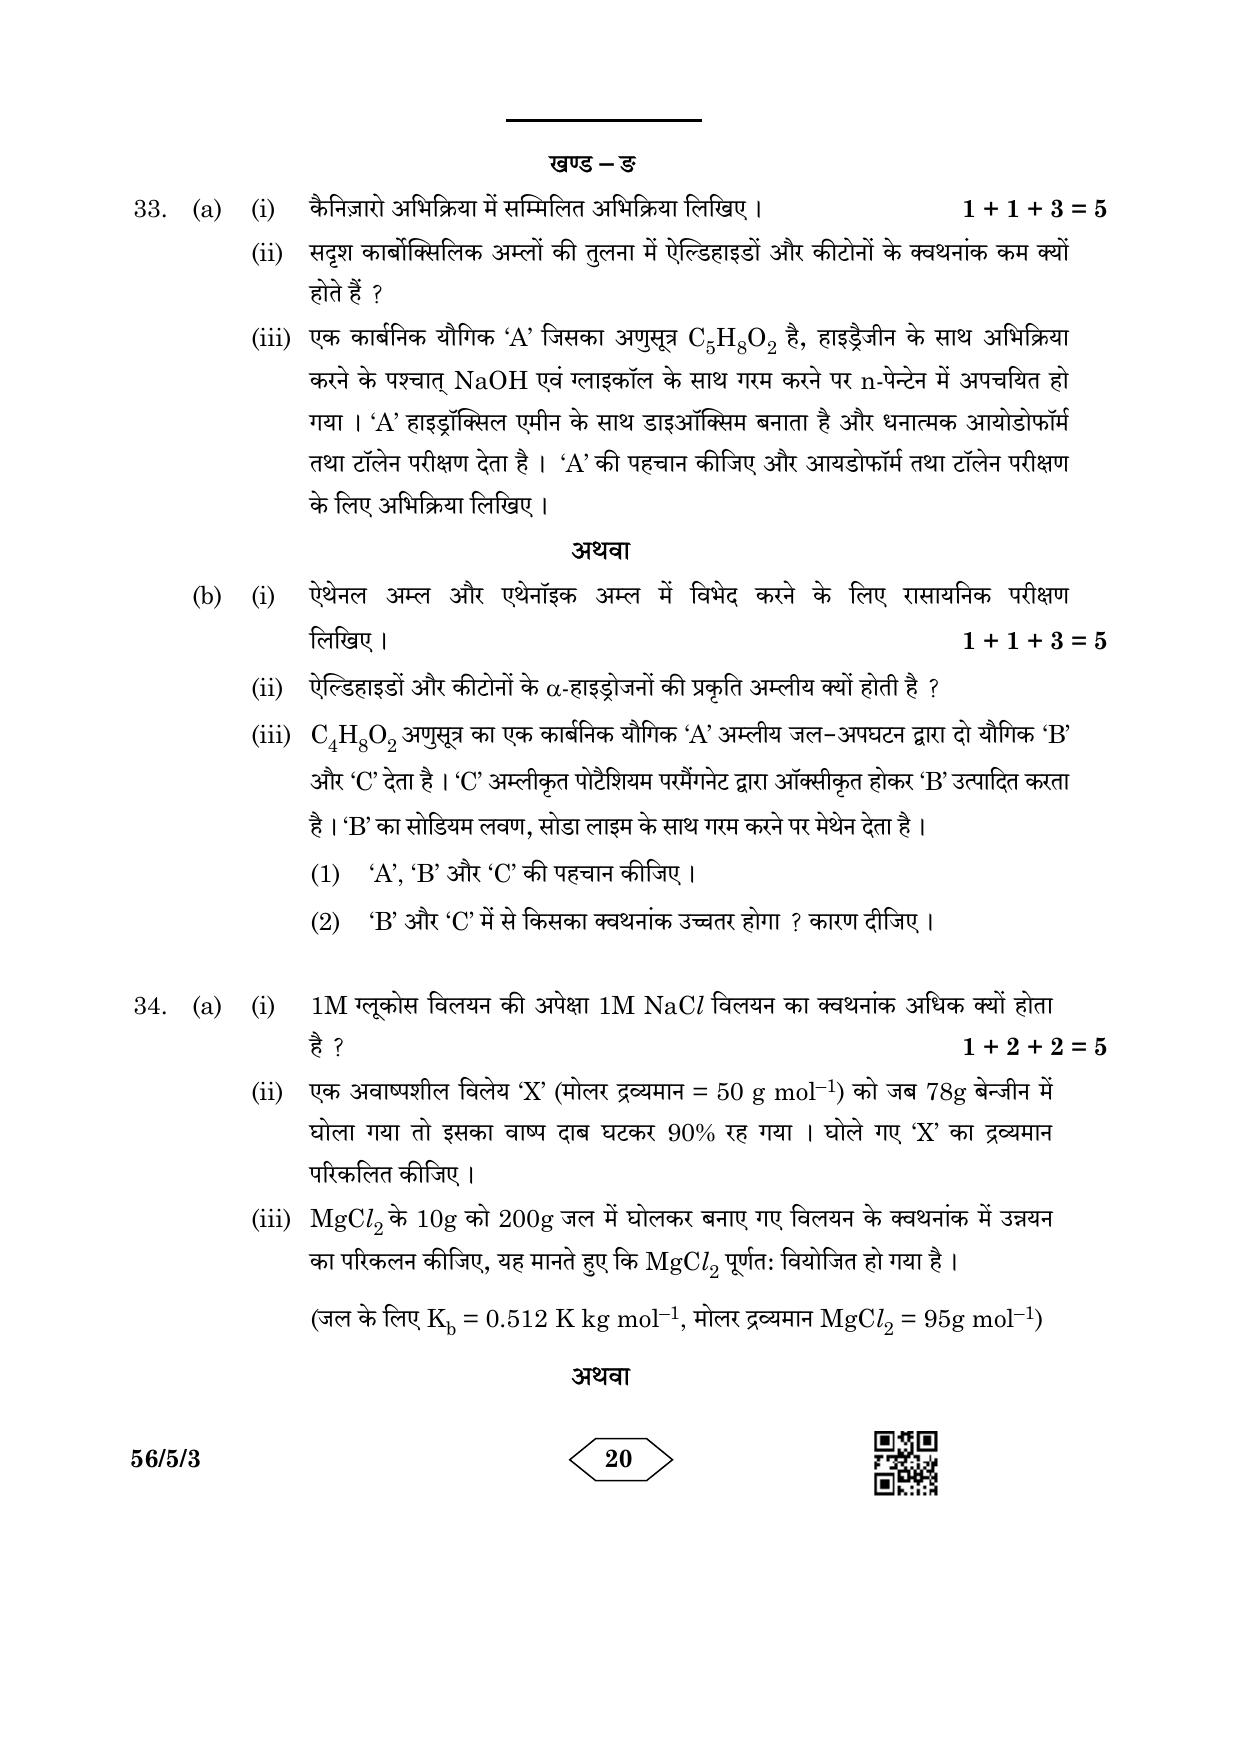 CBSE Class 12 56-5-3 Chemistry 2023 Question Paper - Page 20